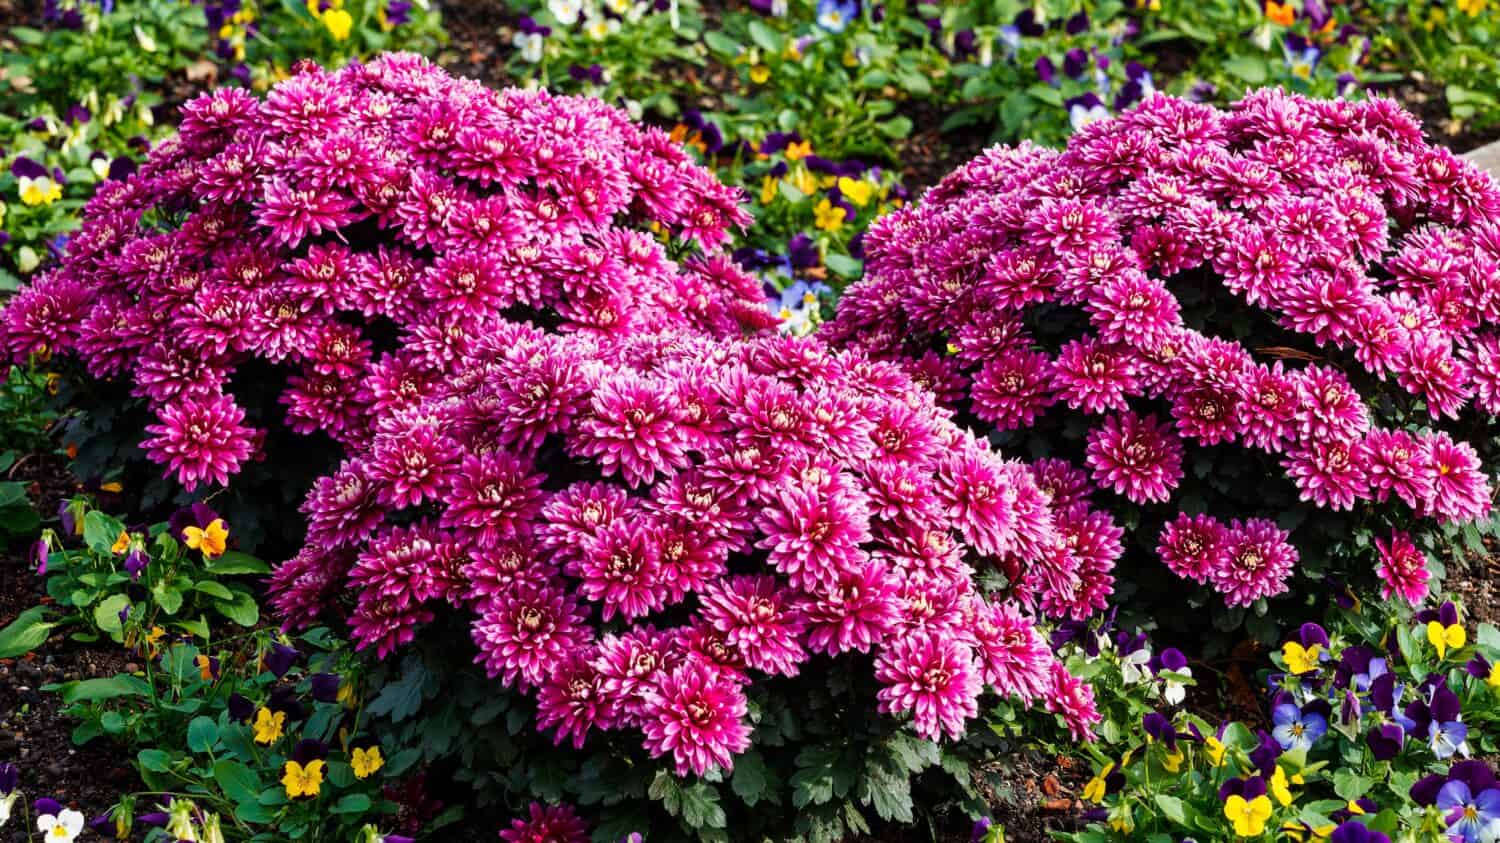 Chrysanthemum × morifolium | Florist's daisies or Hardy garden mums, big globular blooms in red purple on upright stems covered of lobed, pinnatifid and toothed leaves